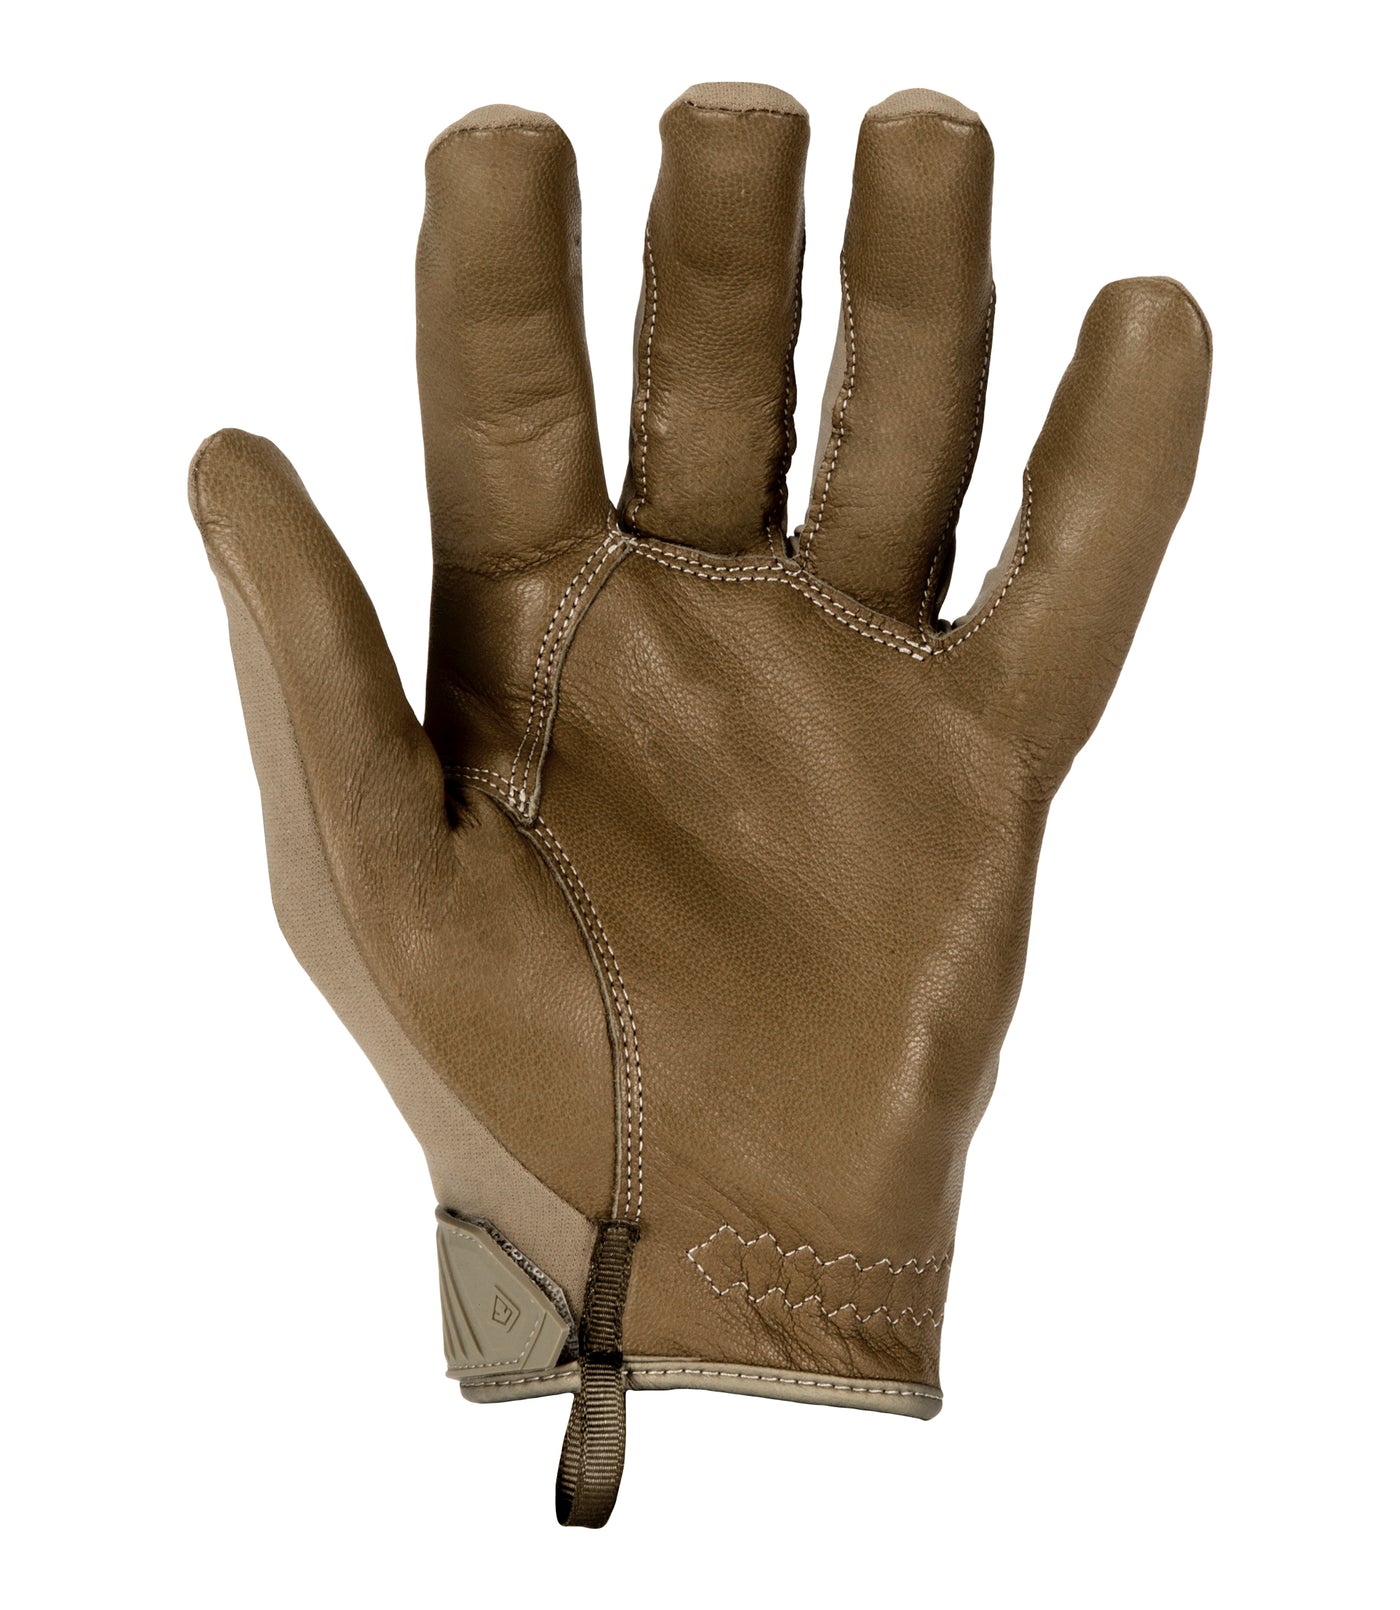 Palm of Men's Pro Knuckle Glove in Coyote